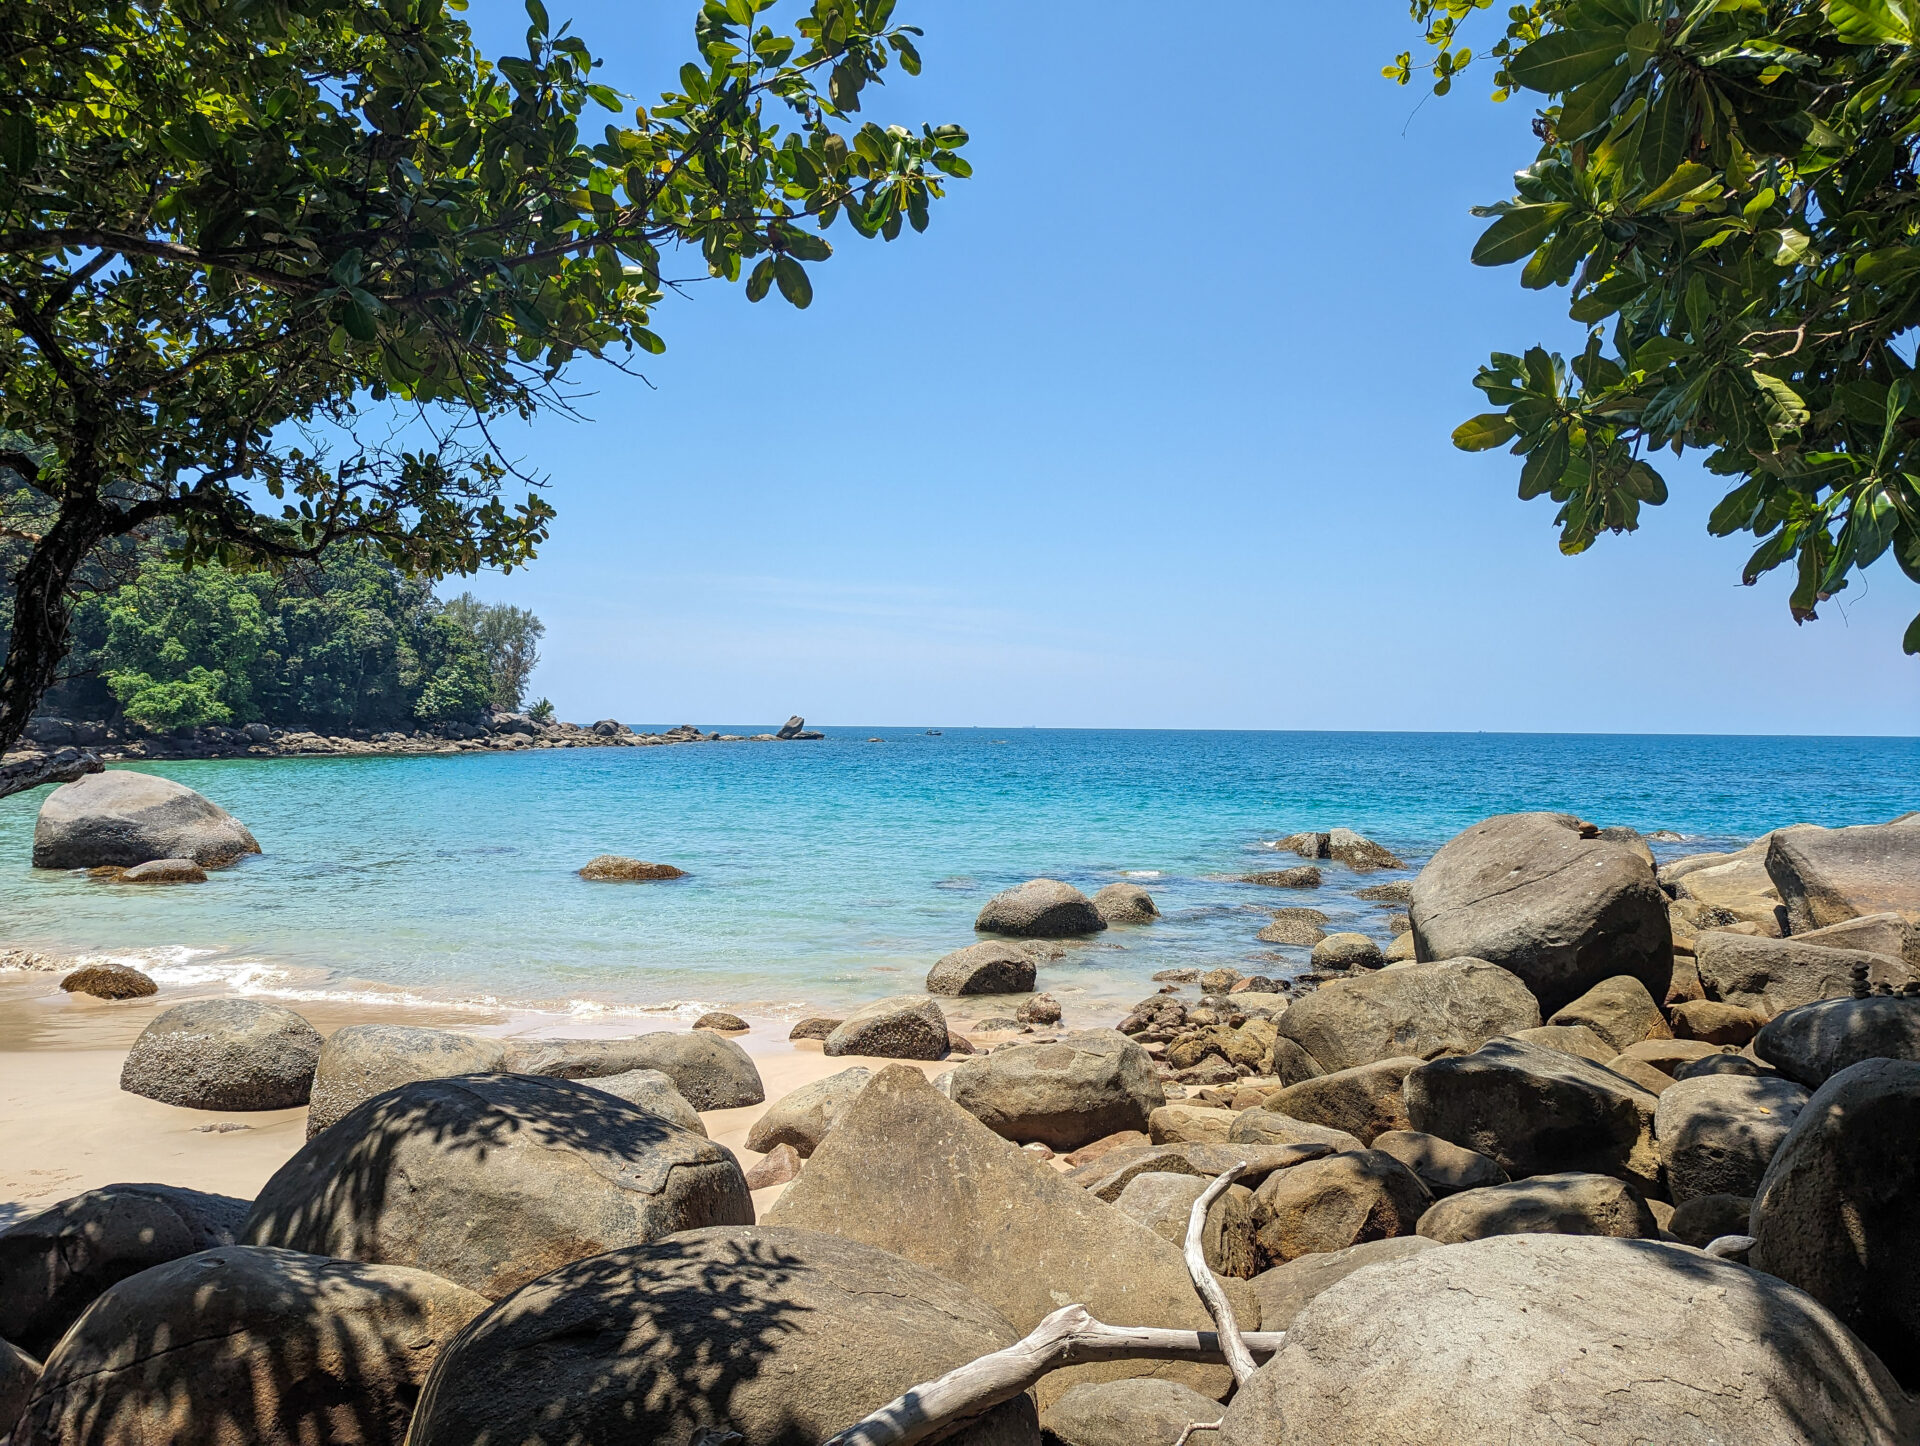 A guide to visiting Khao Lak